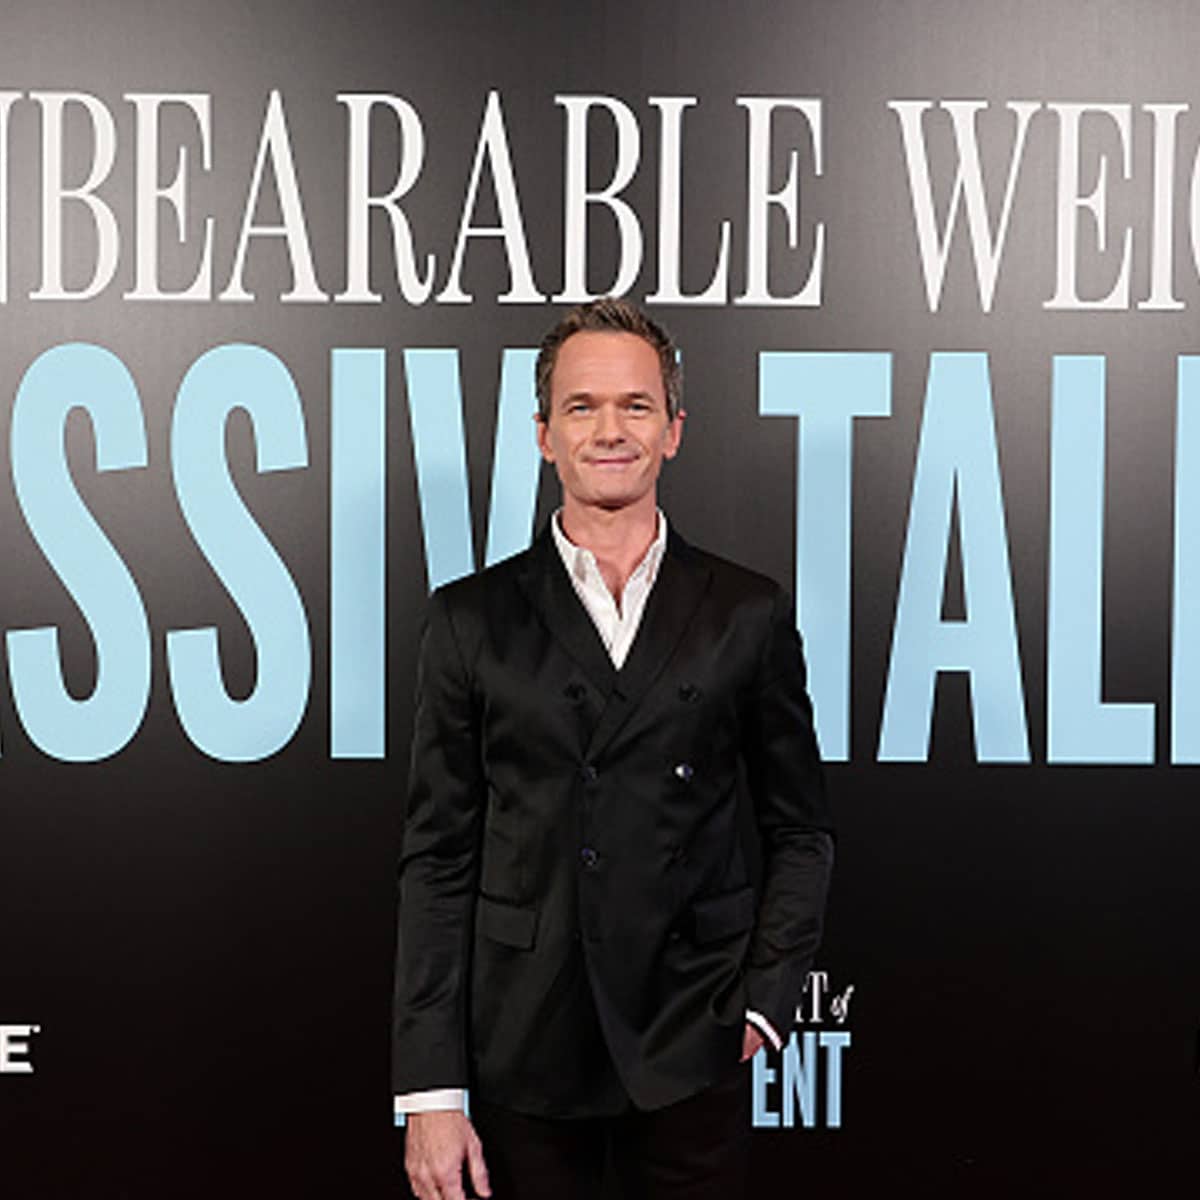 Neil Patrick Harris attends "The Unbearable Weight Of Massive Talent" New York Screening